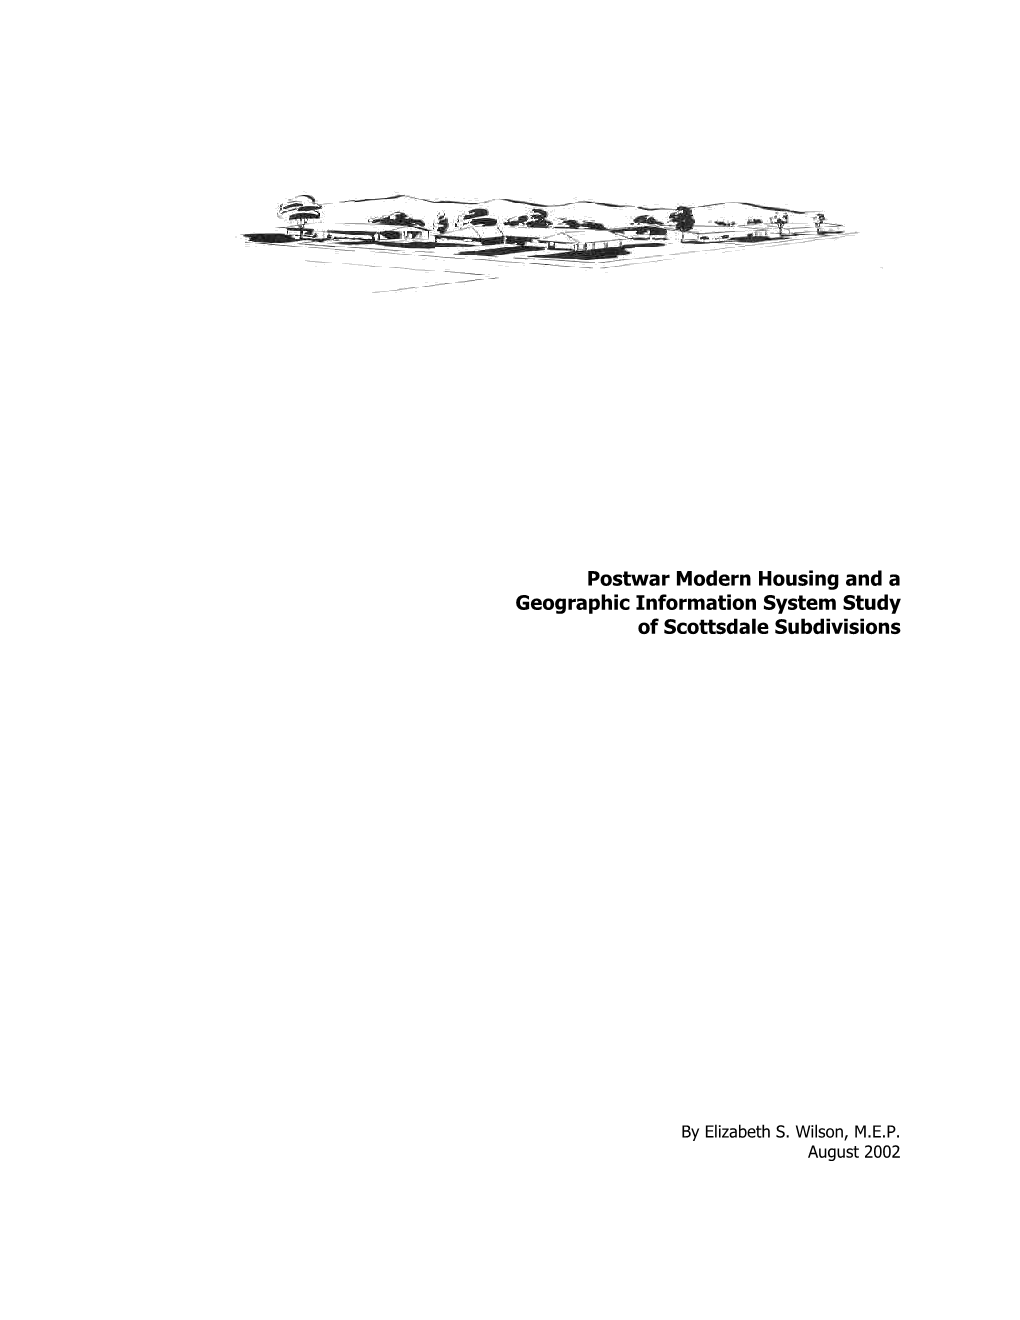 Postwar Modern Housing and a Geographic Information System Study of Scottsdale Subdivisions